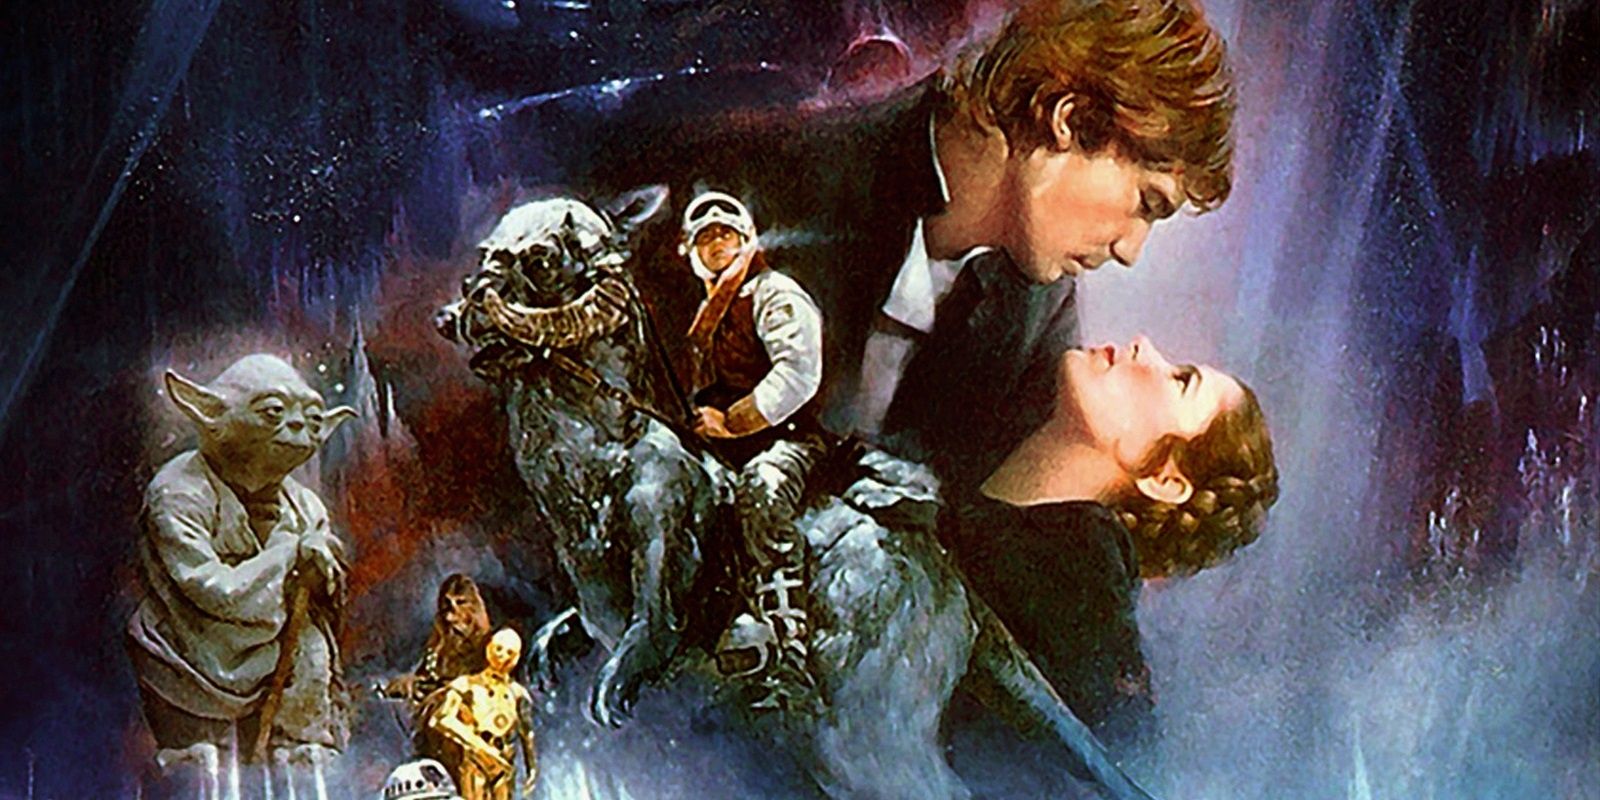 Poster for Star Wars: The Empire Strikes Back